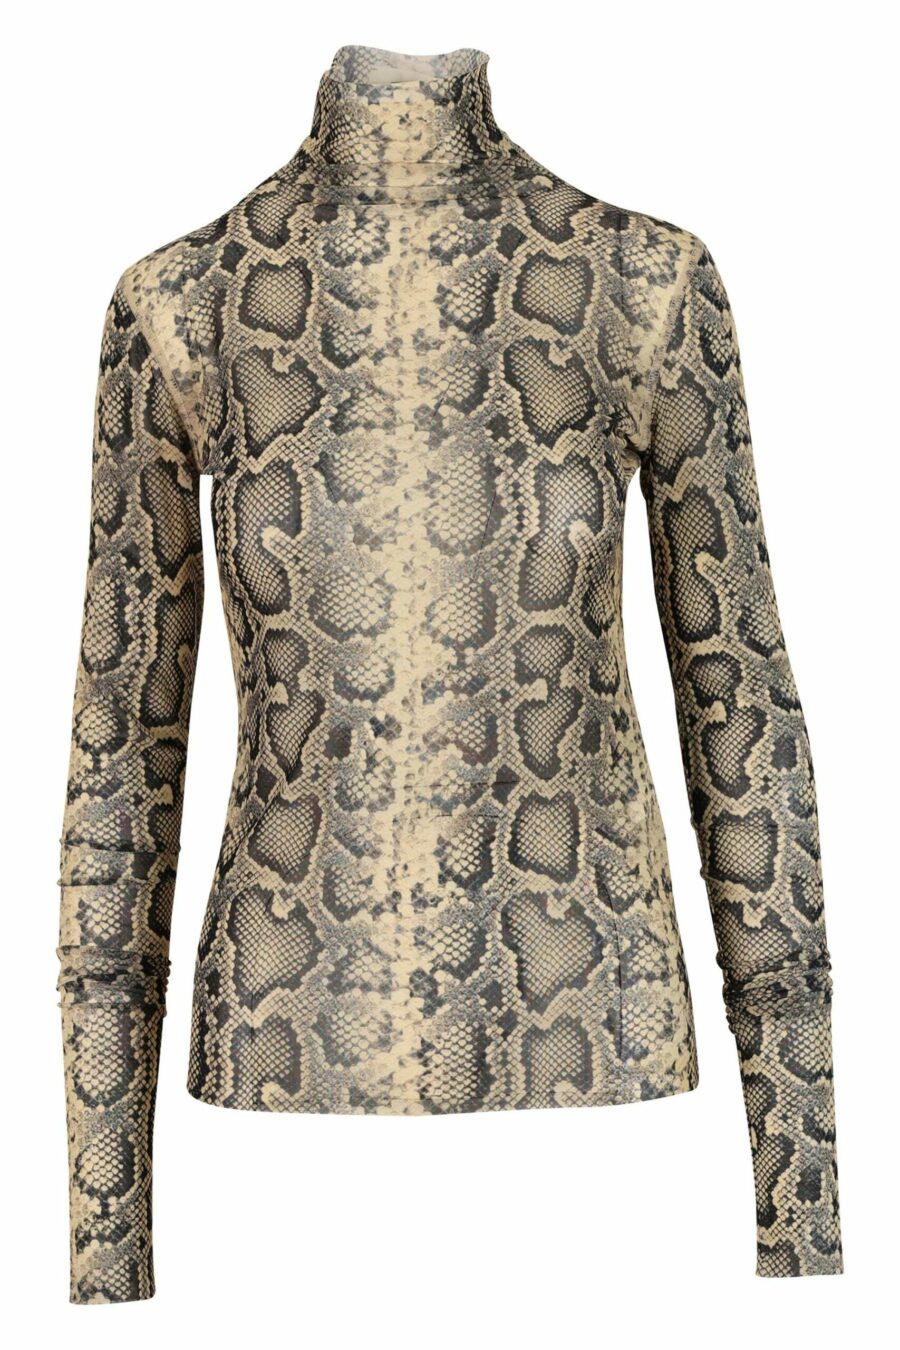 Beige T-shirt with snake print, long sleeves and semi-transparent - 8054943306899 scaled